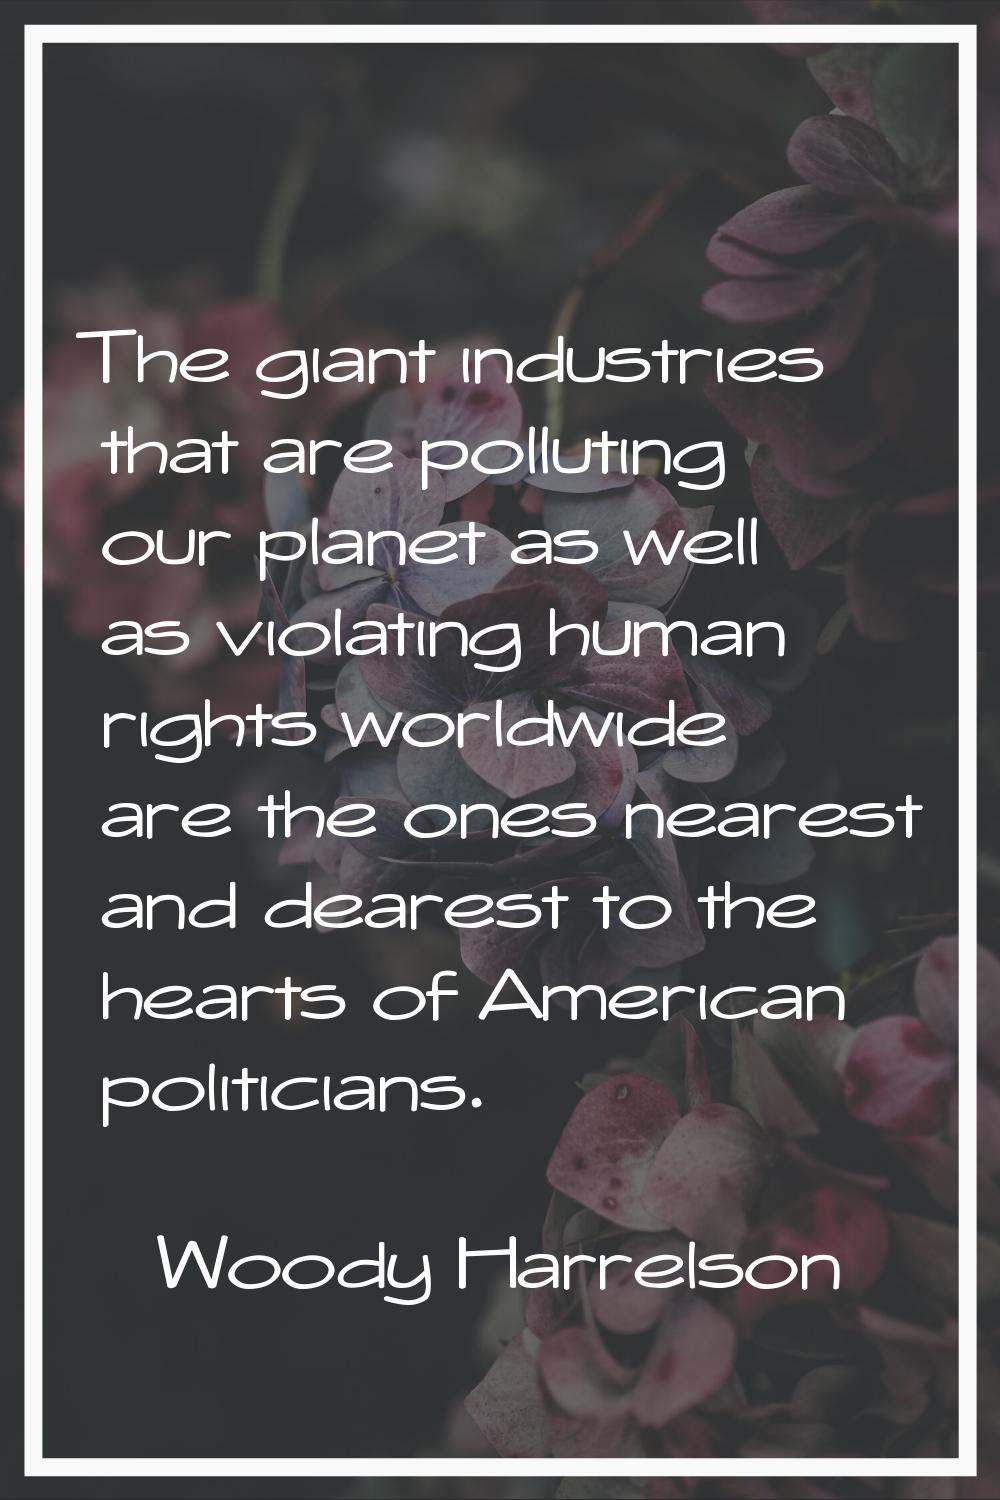 The giant industries that are polluting our planet as well as violating human rights worldwide are 